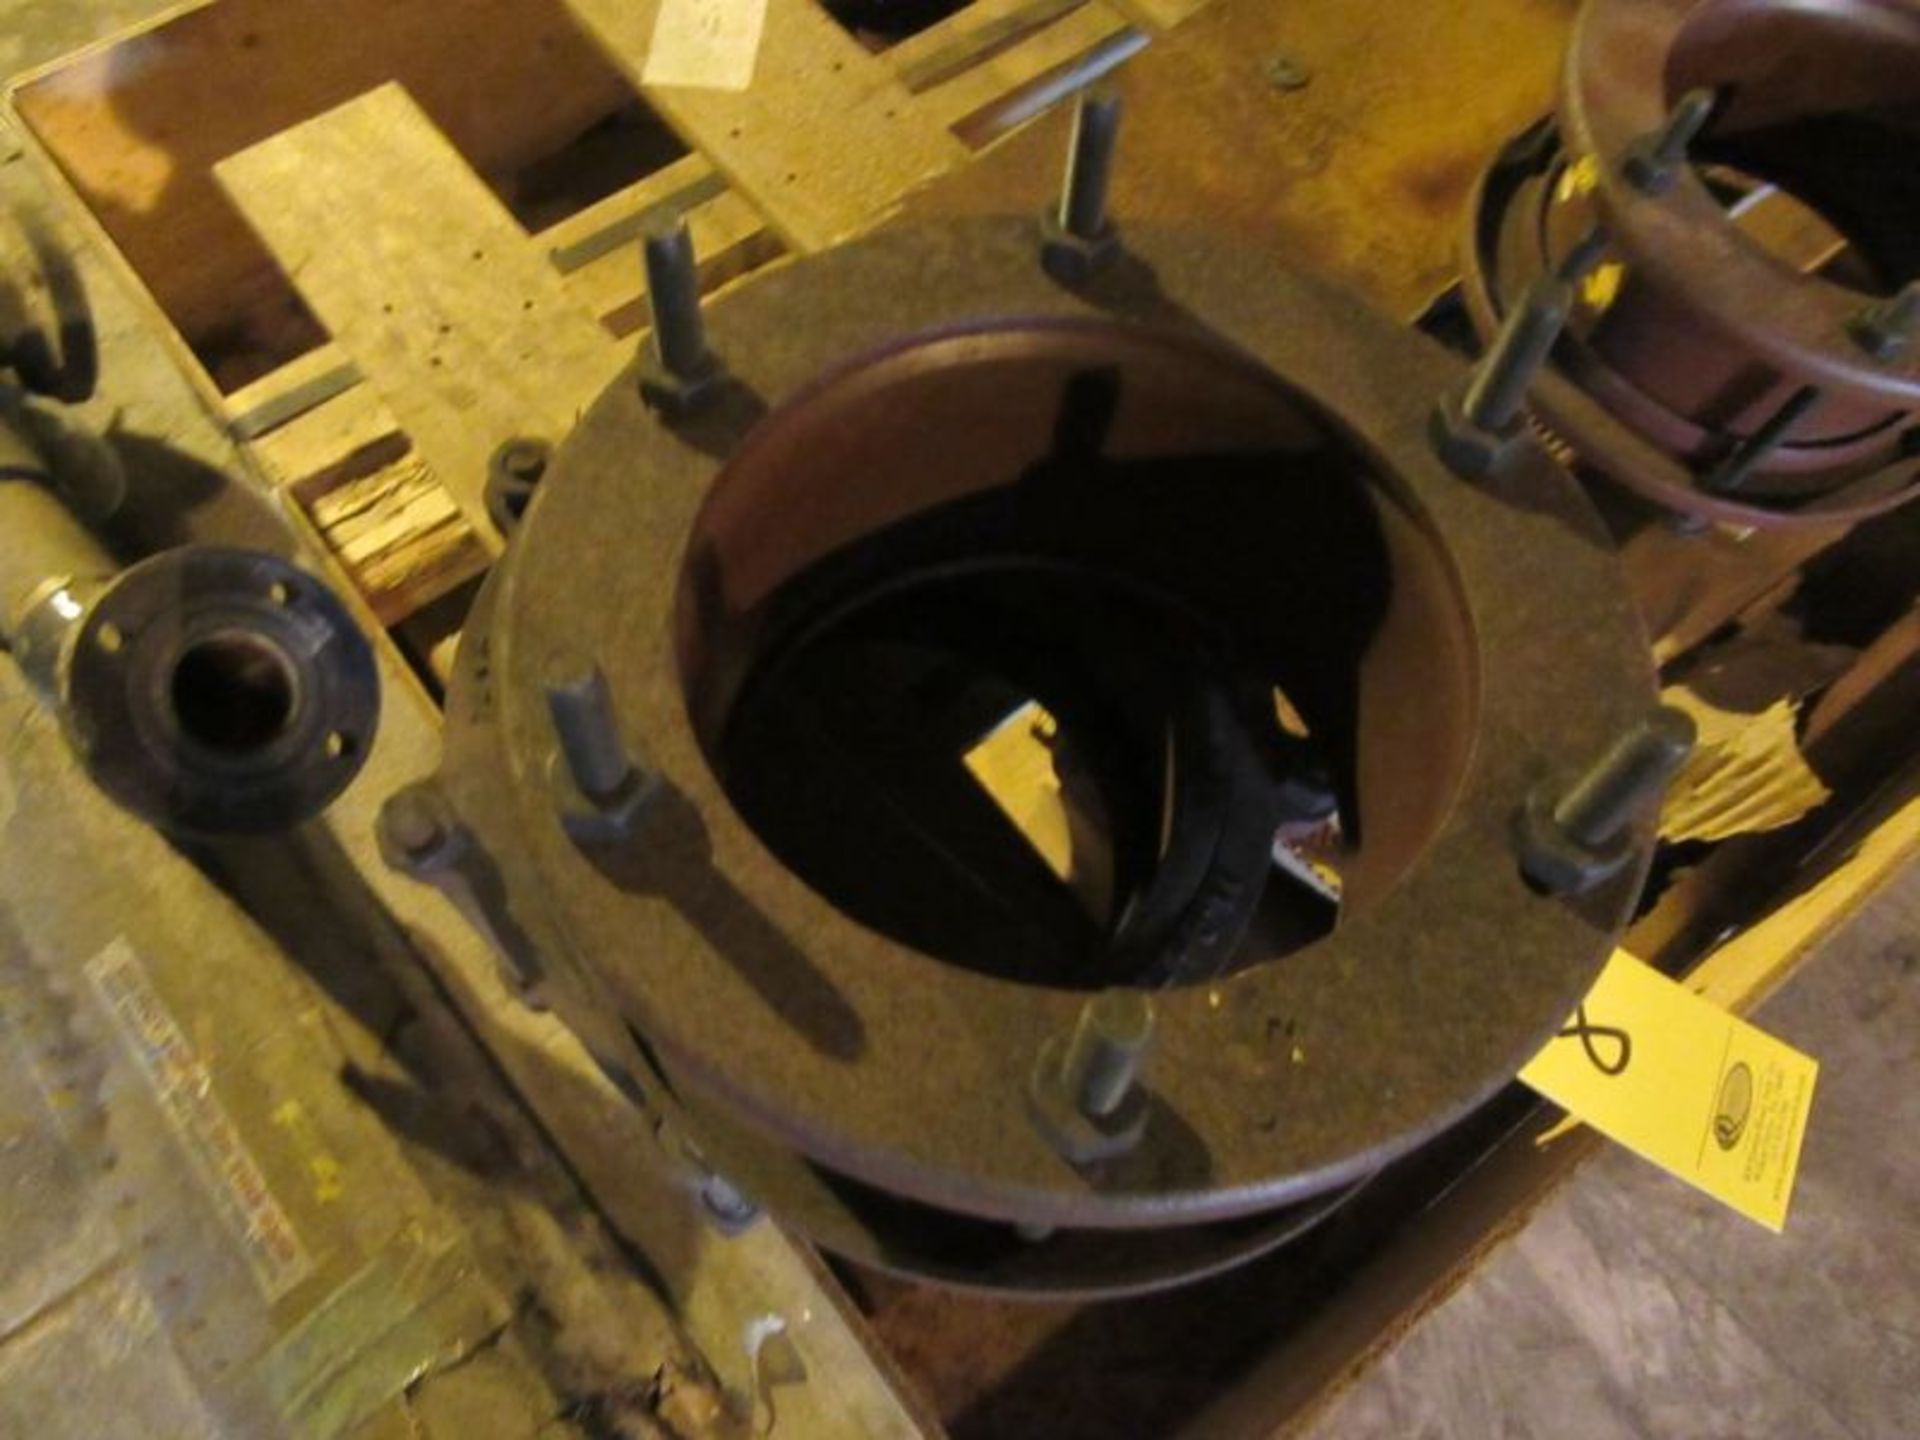 DRESSER STYLE COUPLINGS, BORE SLEEVE, NUT CHANNEL COVERS, VALVES ETC - Image 3 of 4